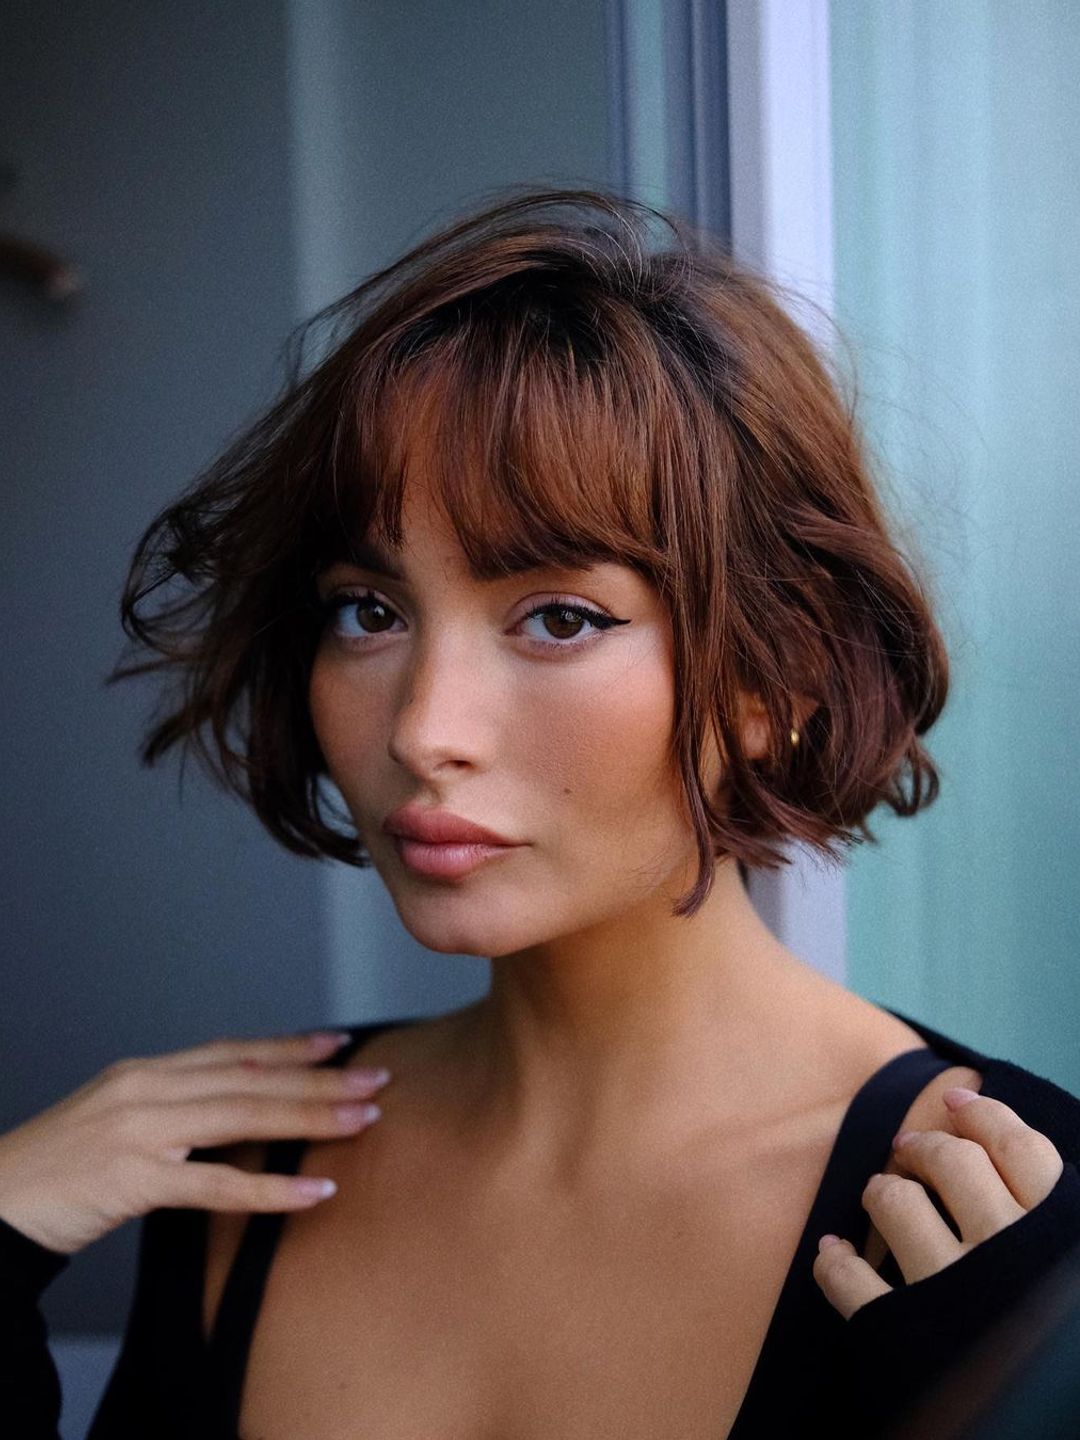 50 Best Short Hairstyles for Women in 2021 - How to Style Short Hair